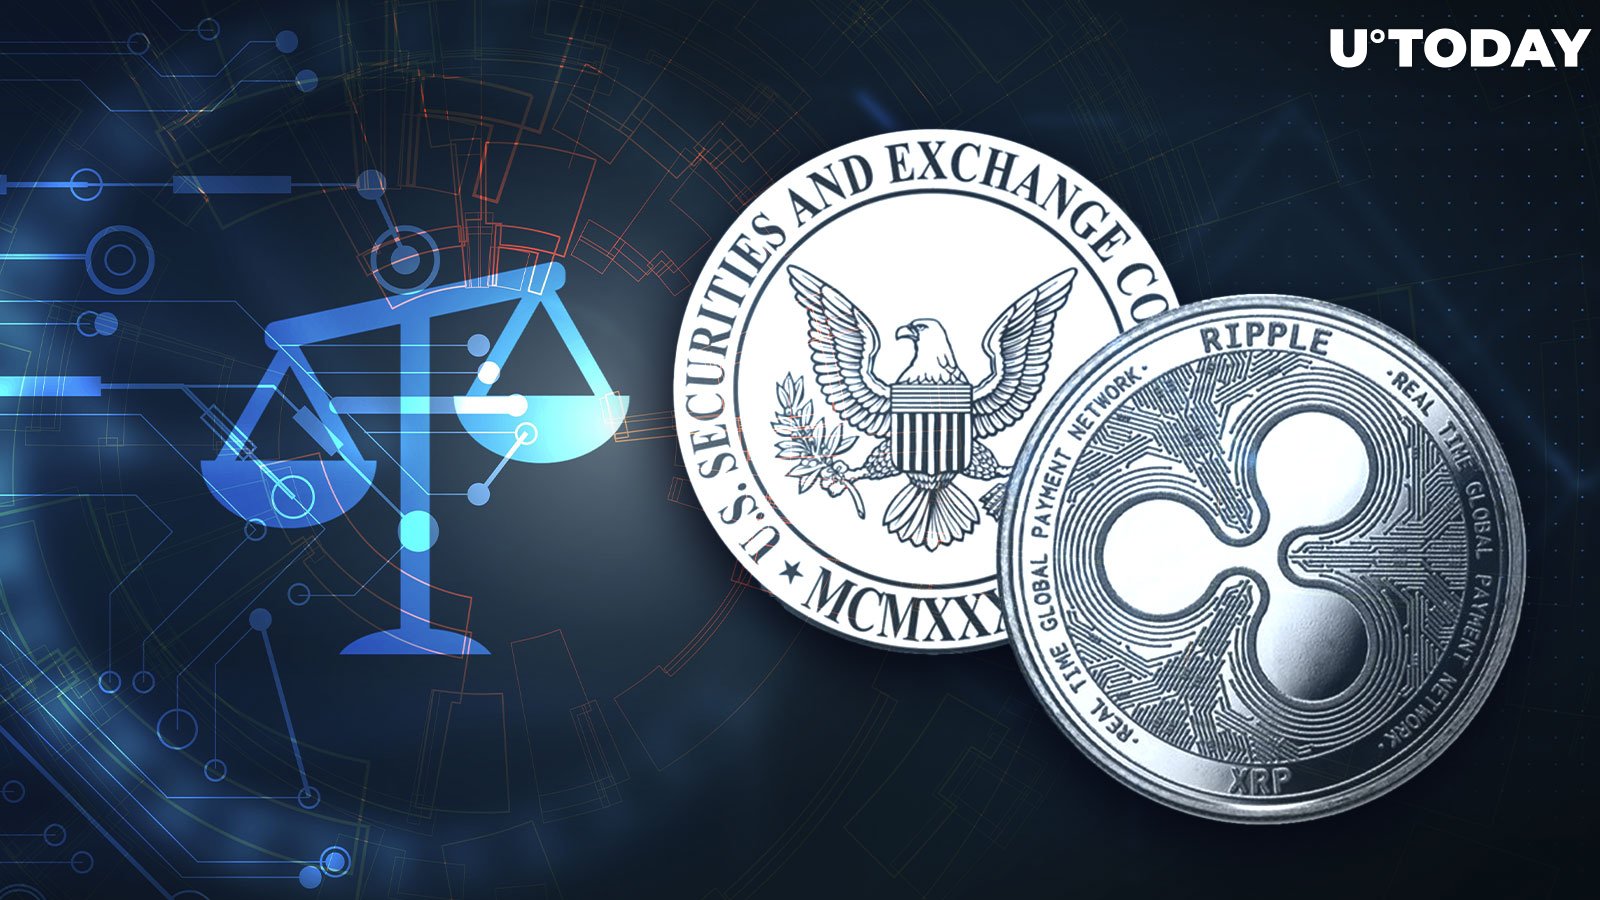 Ripple vs SEC: Countdown Begins for Unsealing of Summary Judgment Documents